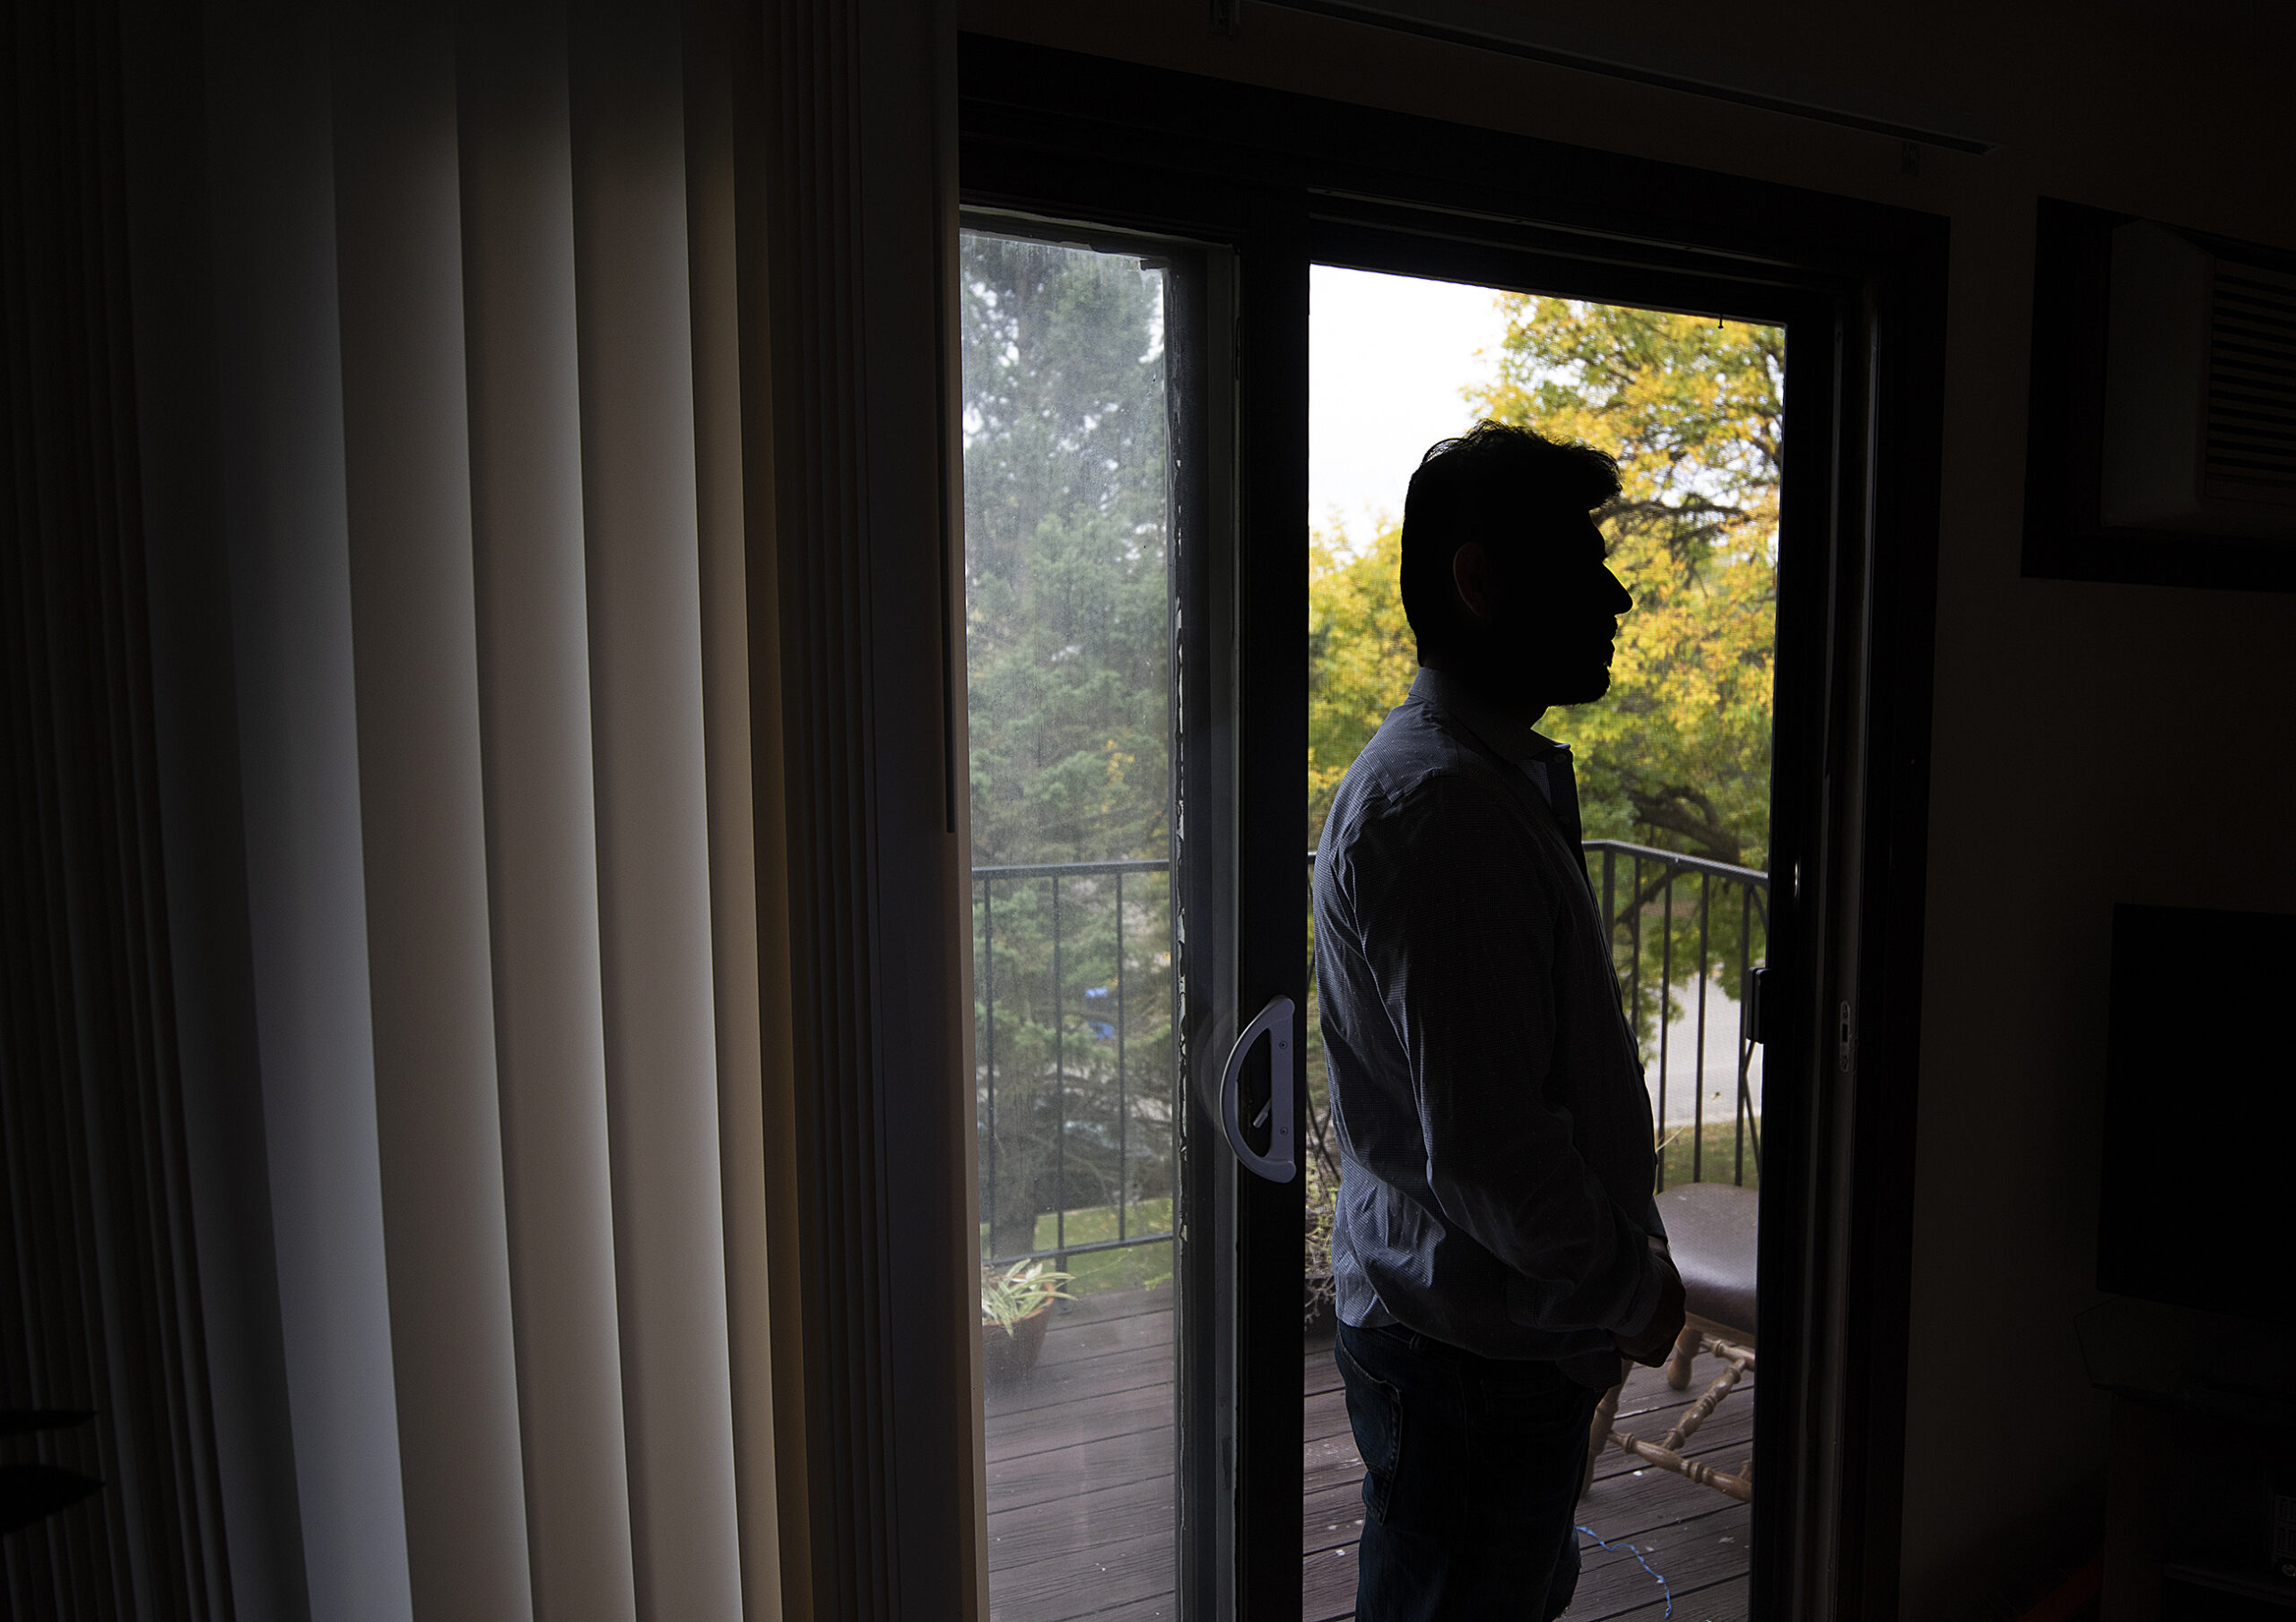 Johnny is seen in silhouette in front of a window in his apartment.